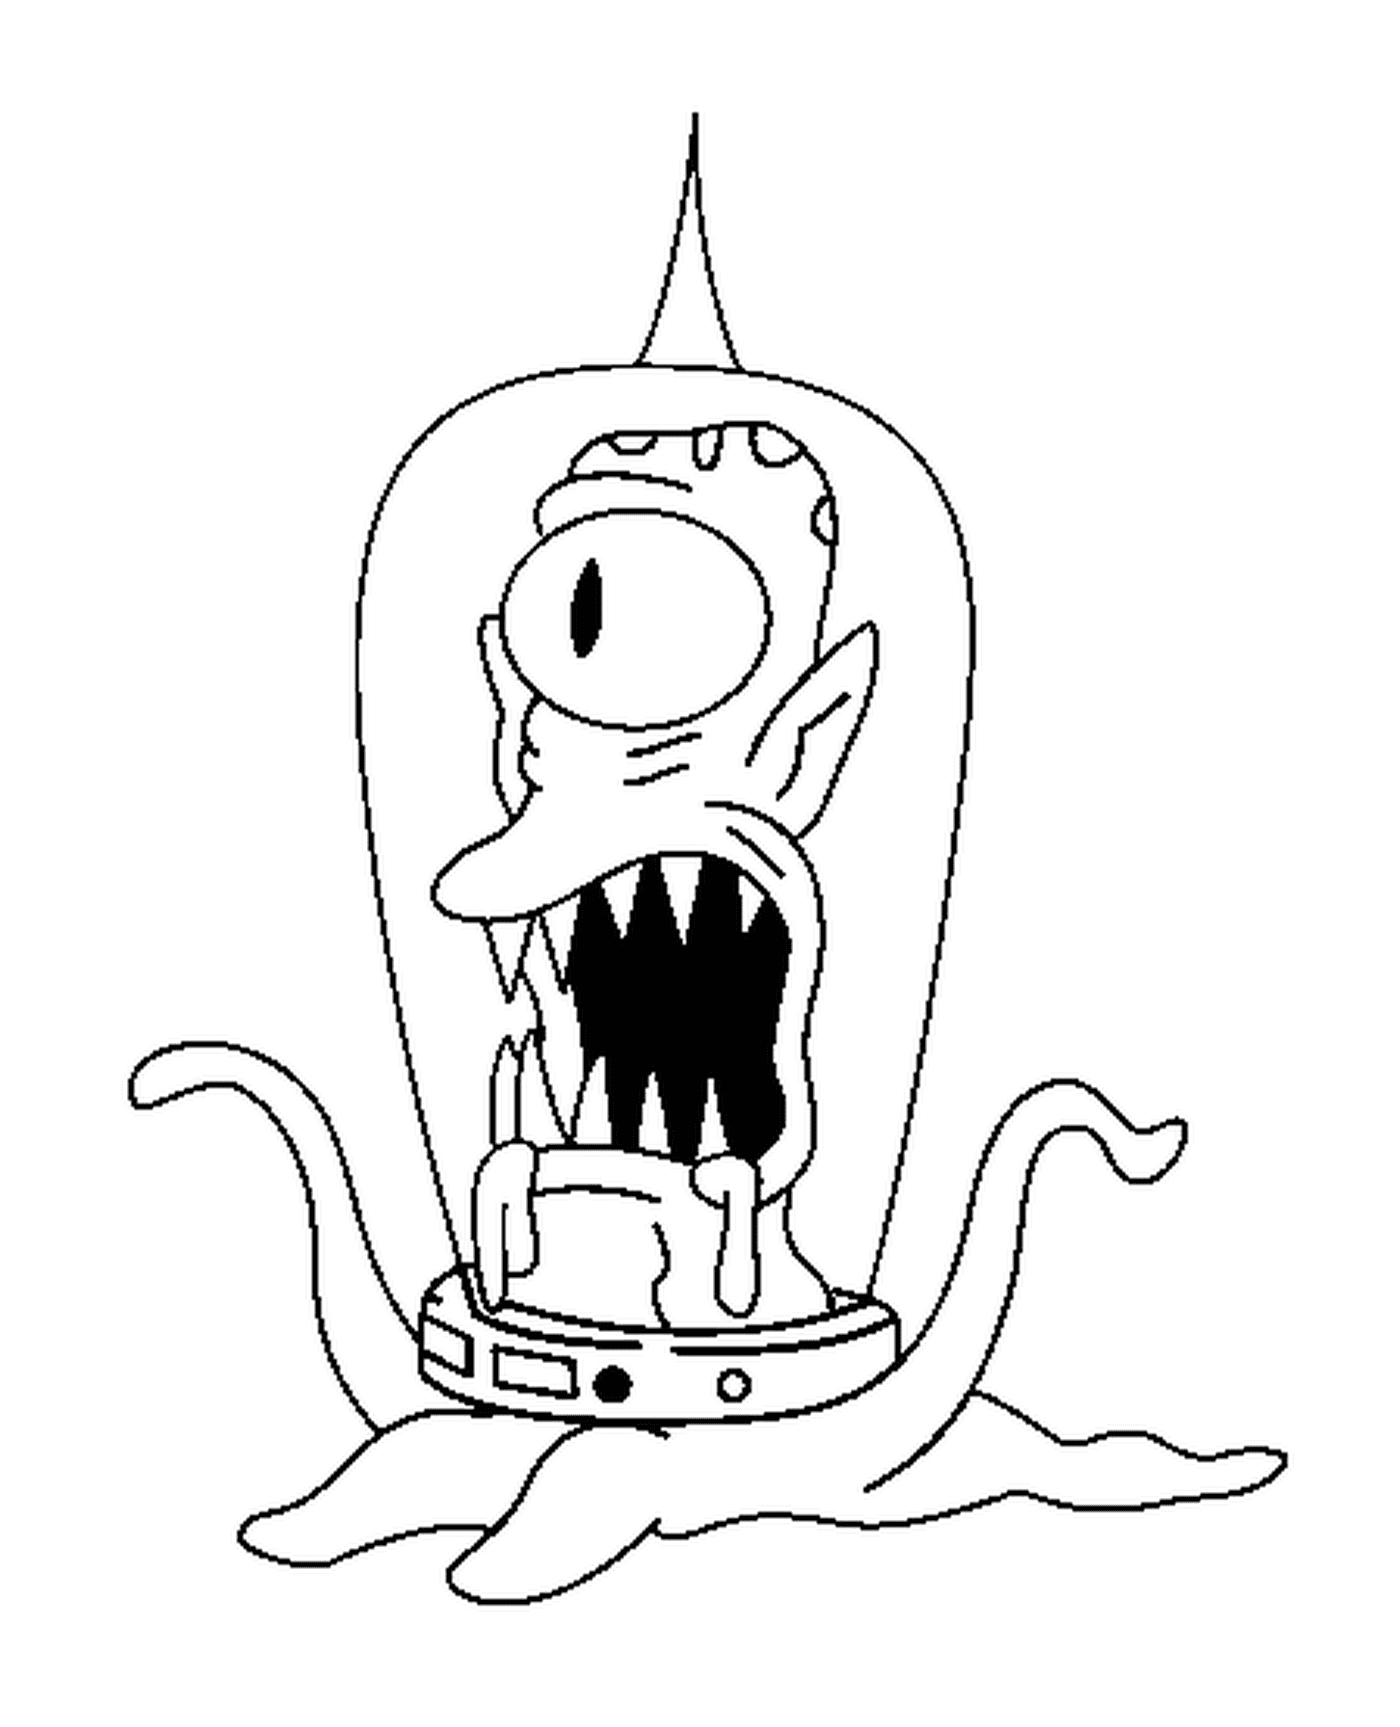  Alien, cartoon character with a strange face 